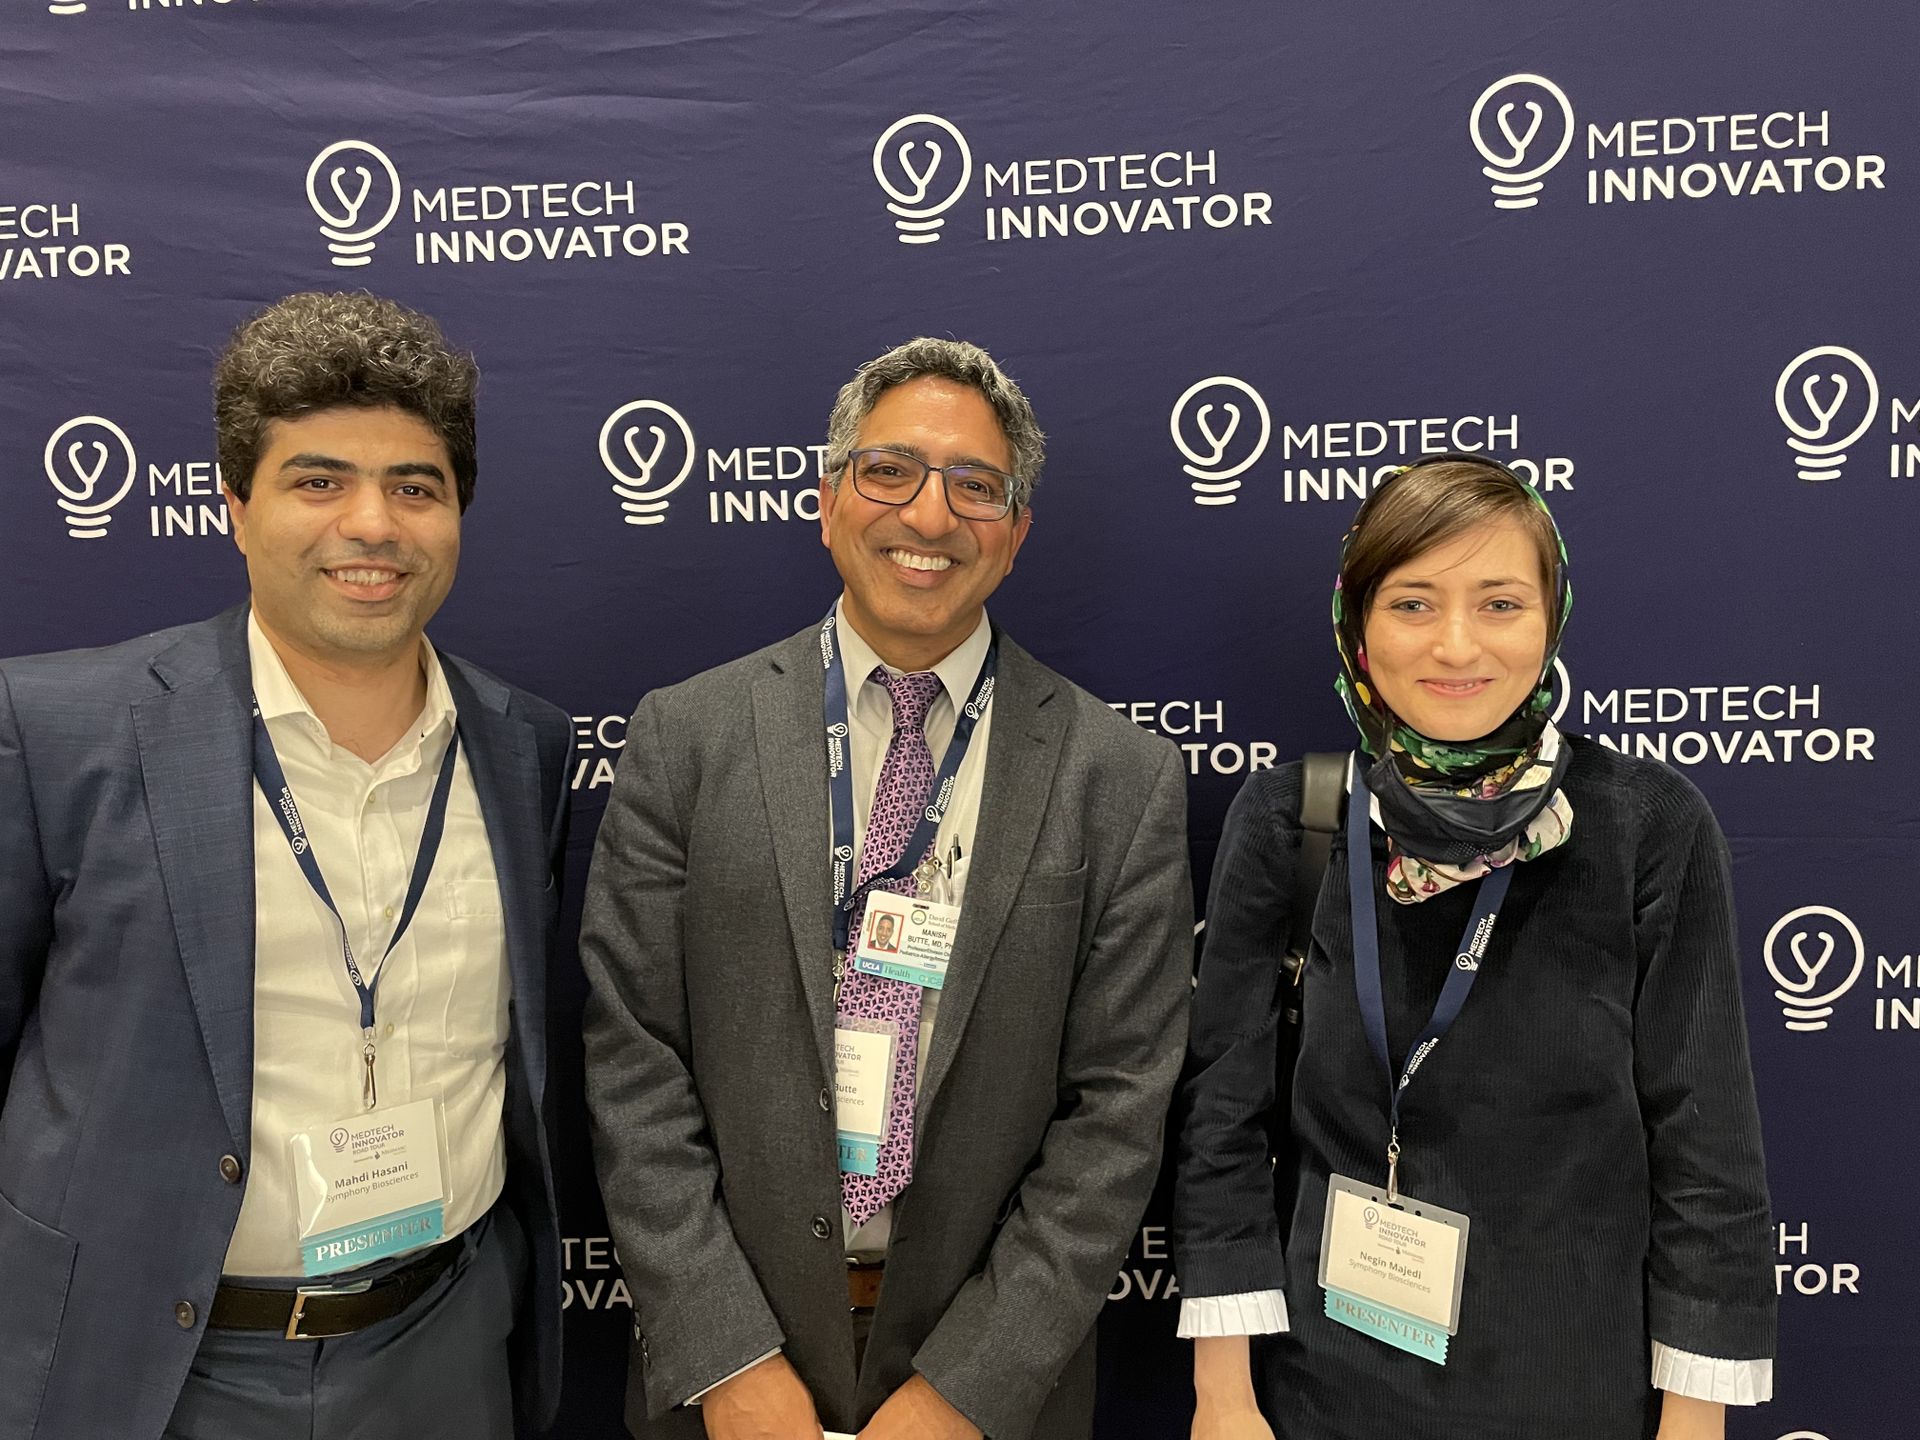 Three people standing together: From left: UCLA project scientist and Symphony chief scientific officer Mahdi Hasani, UCLA professor Manish Butte, and UCLA alumna and Symphony CEO Negin Majedi